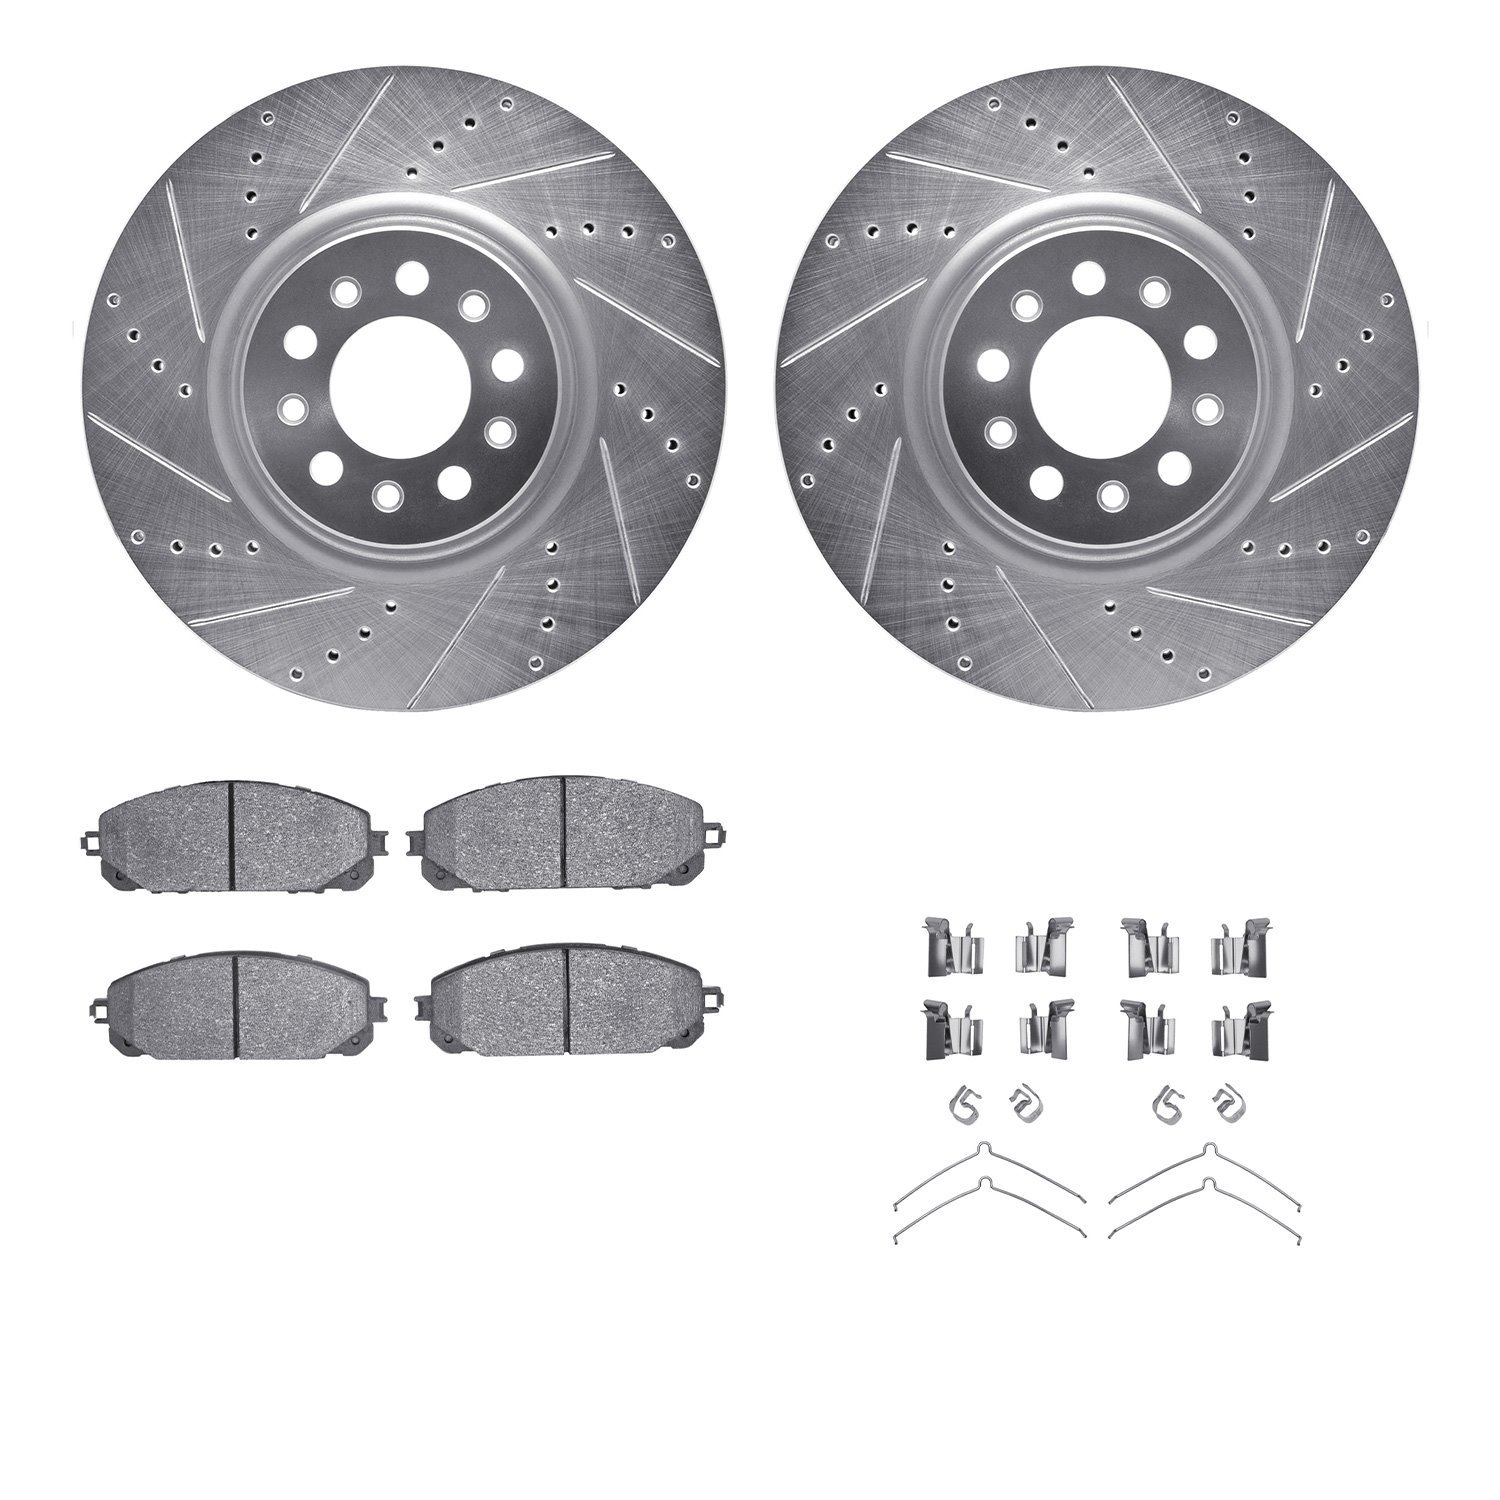 7412-42016 Drilled/Slotted Brake Rotors with Ultimate-Duty Brake Pads Kit & Hardware [Silver], Fits Select Mopar, Position: Fron